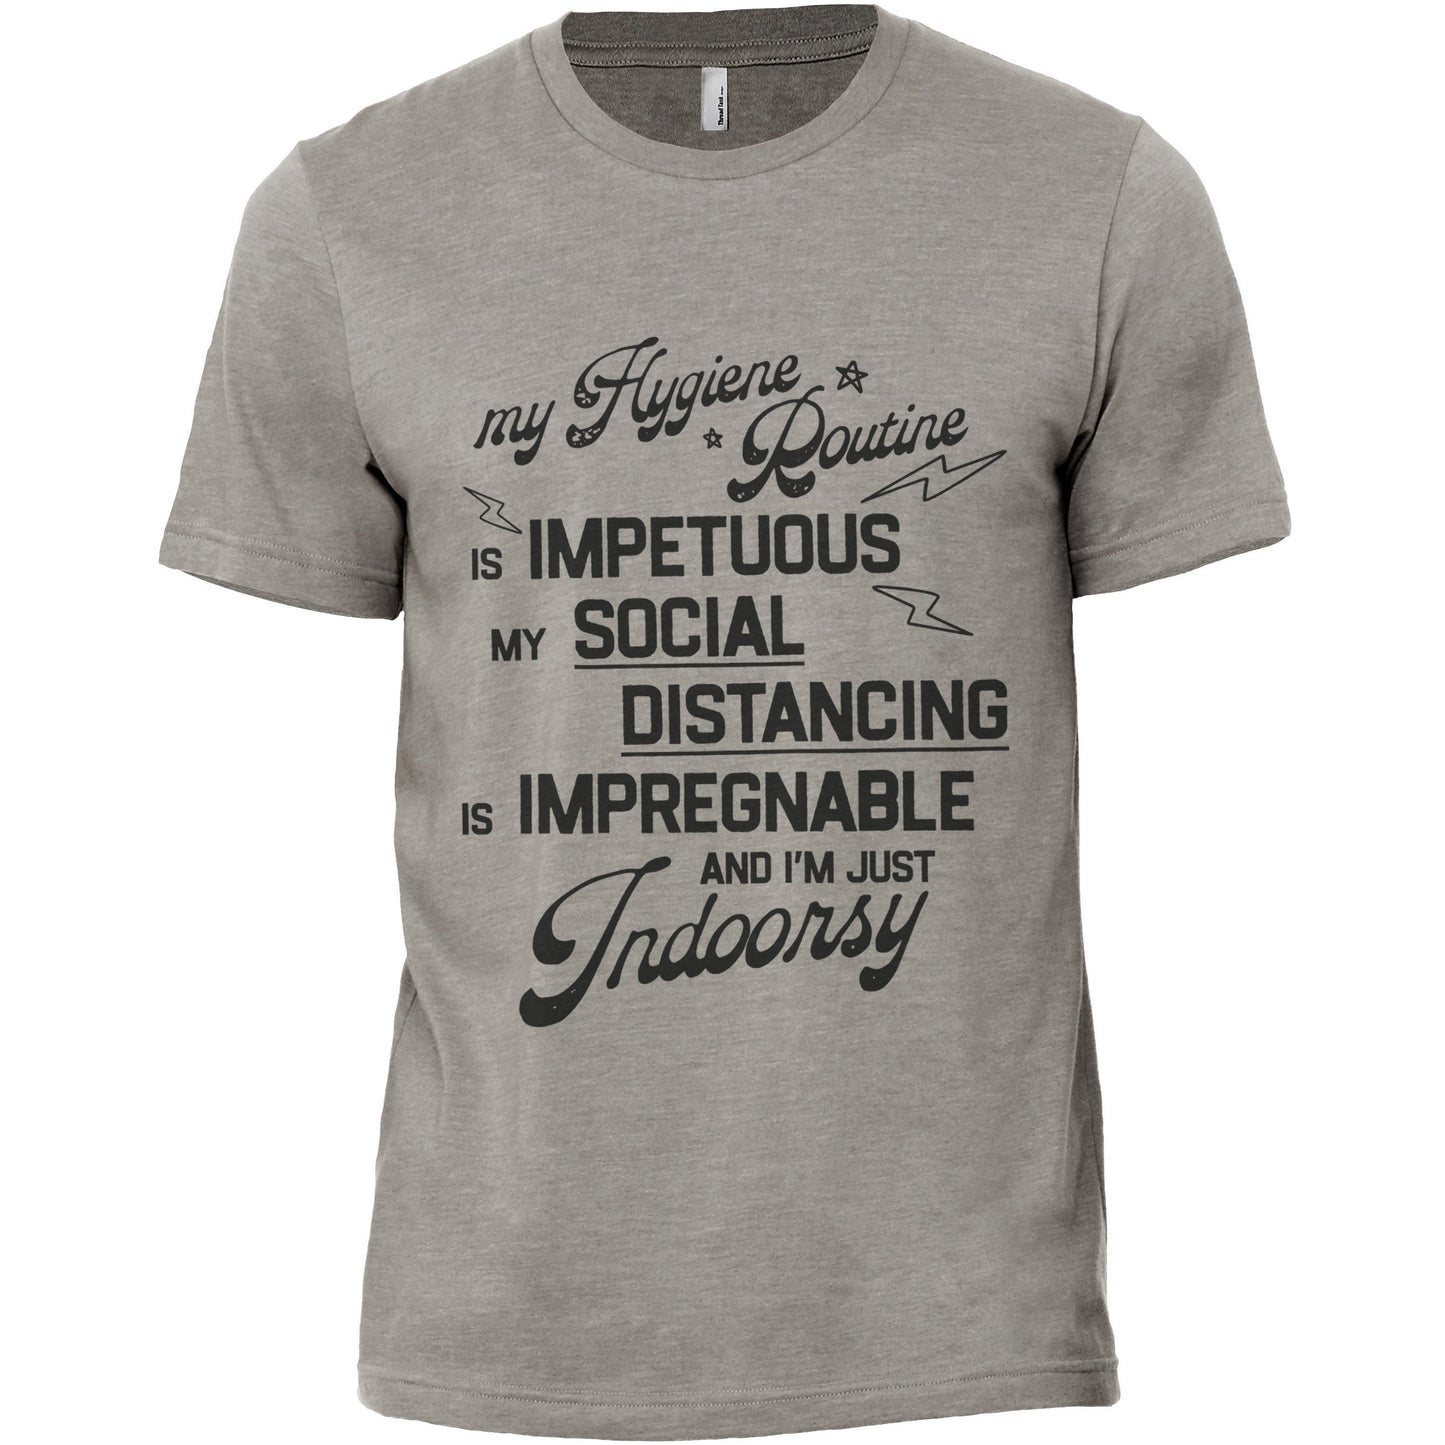 Hygiene Routine Impetuous Military Grey Printed Graphic Men's Crew T-Shirt Tee